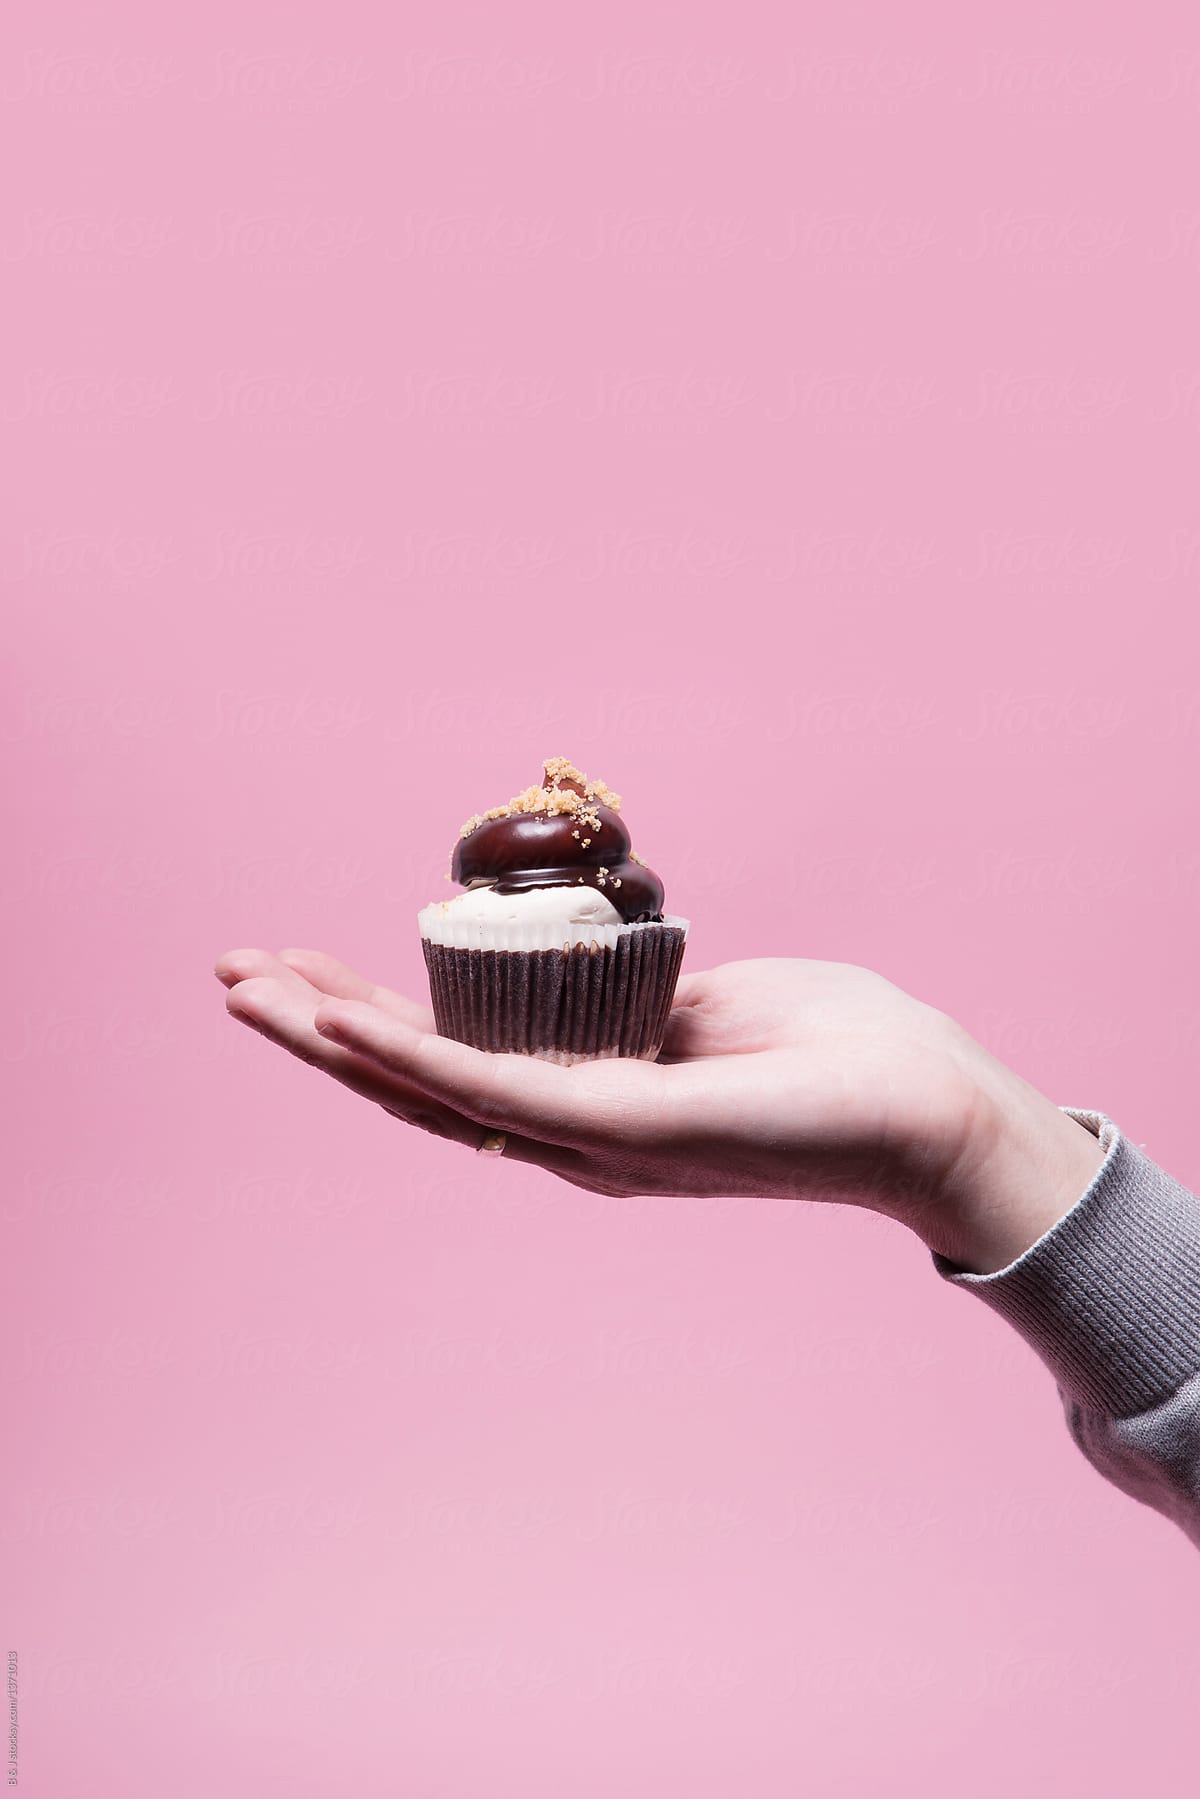 Male hand holding chocolate cupcake against bright pink background